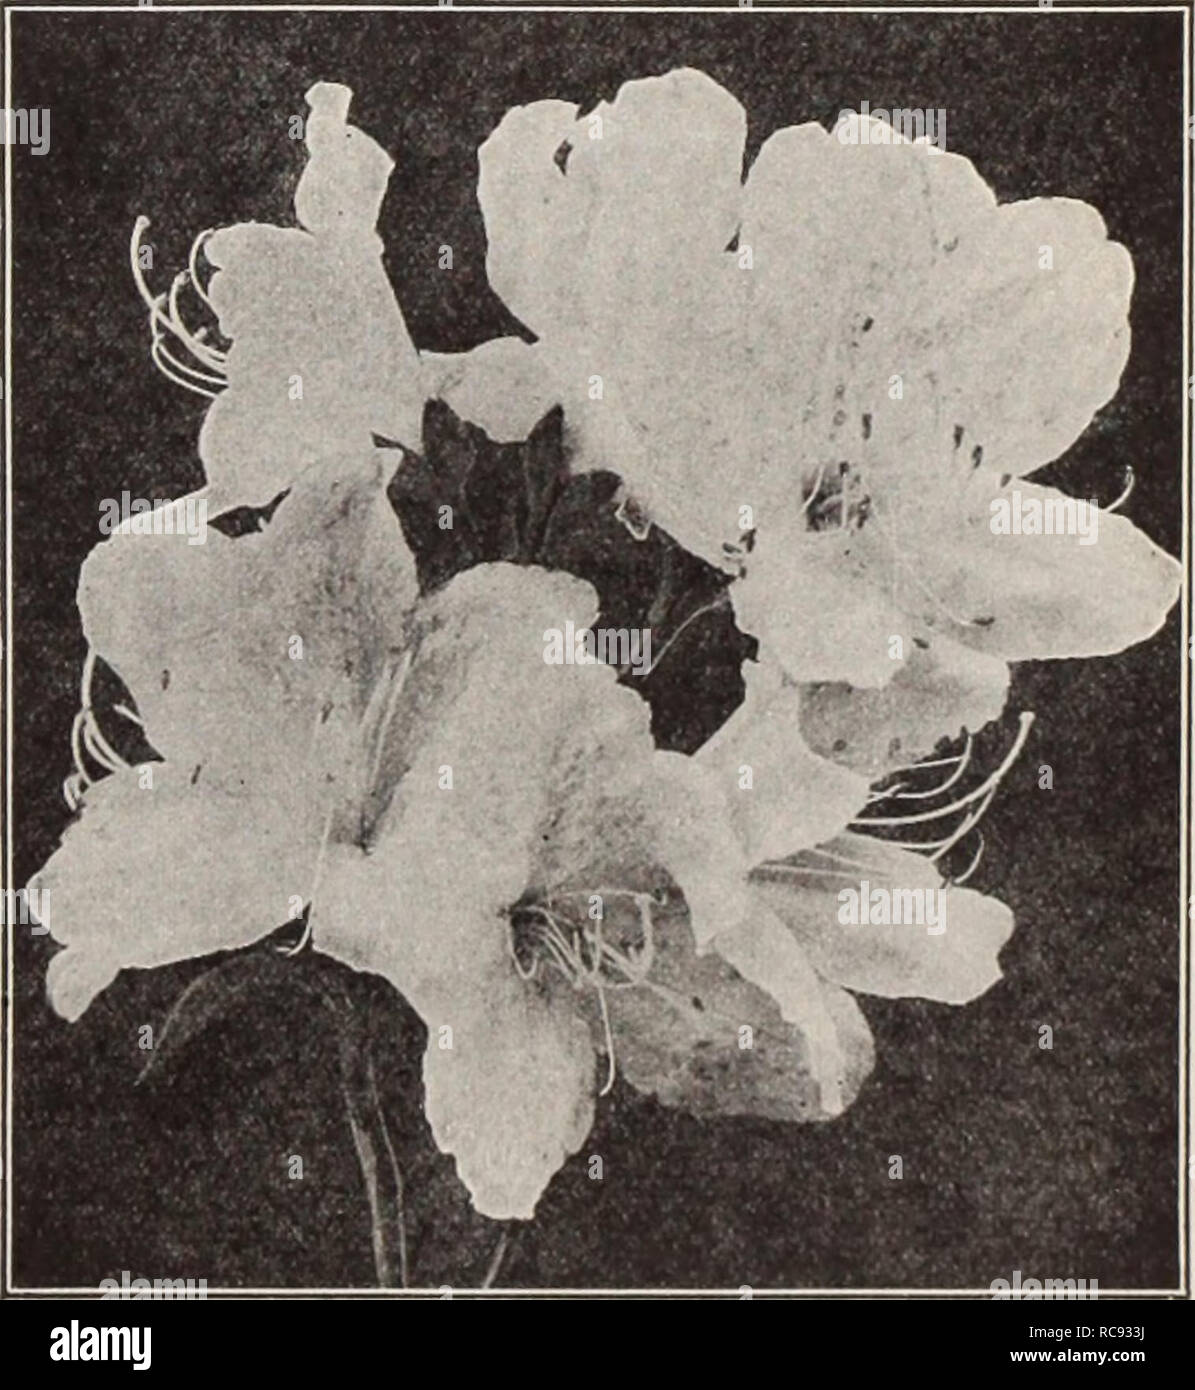 . Dreer's garden book / Henry A. Dreer.. Nursery Catalogue. Abelia Chinensis Grandiflora A choice small Shrub of graceful habit, producing through the entire summer and fall white tinted lilac heather-like flowers in such abundance as to completely cover the plant. Plants from 4-inch pots, 50 cts. each. Althea (Rose of Sharon) The Altheas are among the most valuable of our tall, hardy Shrubs on account of their late season of blooming, which is from August to October, a period when but few Shrubs are in flower. They are also extensively used as hedge plants, for which they are admirably adapte Stock Photo